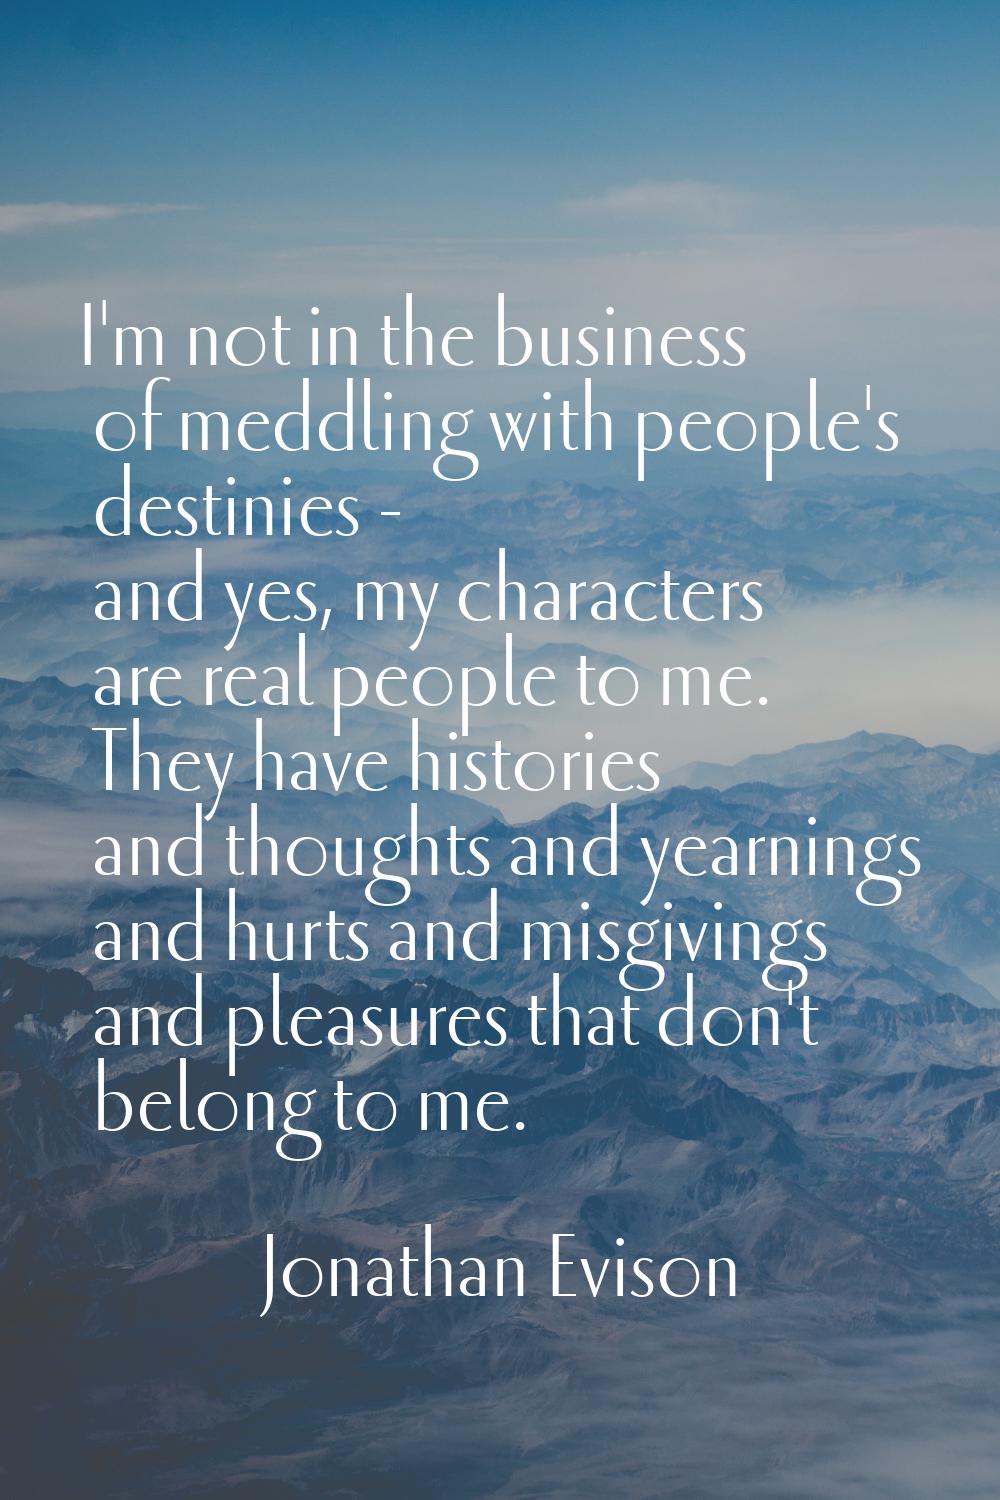 I'm not in the business of meddling with people's destinies - and yes, my characters are real peopl